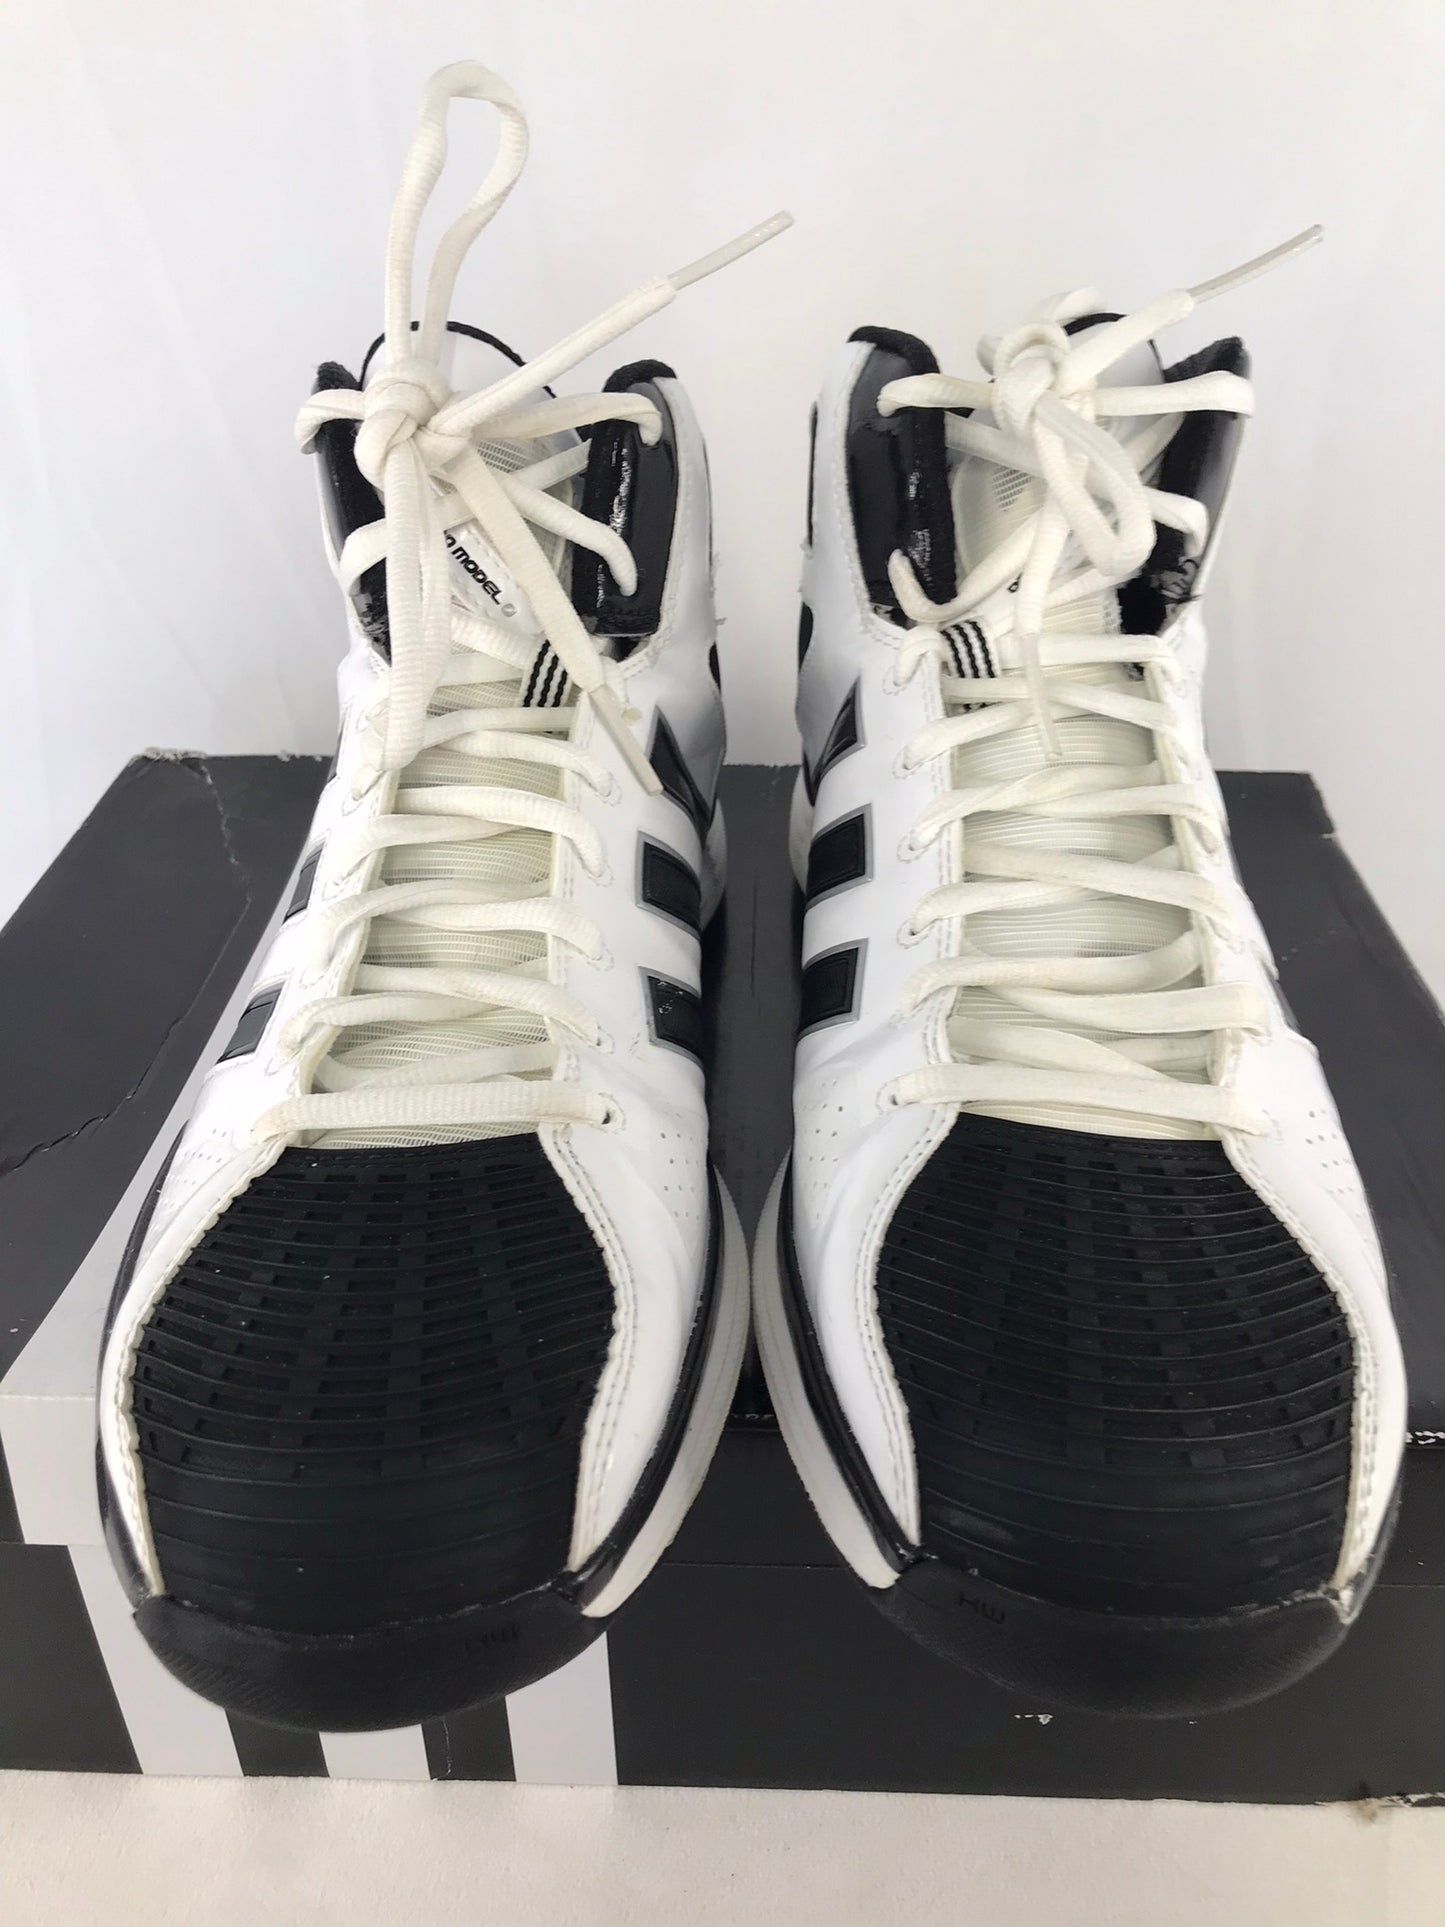 Basketball Shoes Runners Men's Size 13 Adidas Pro Black White New Demo Model